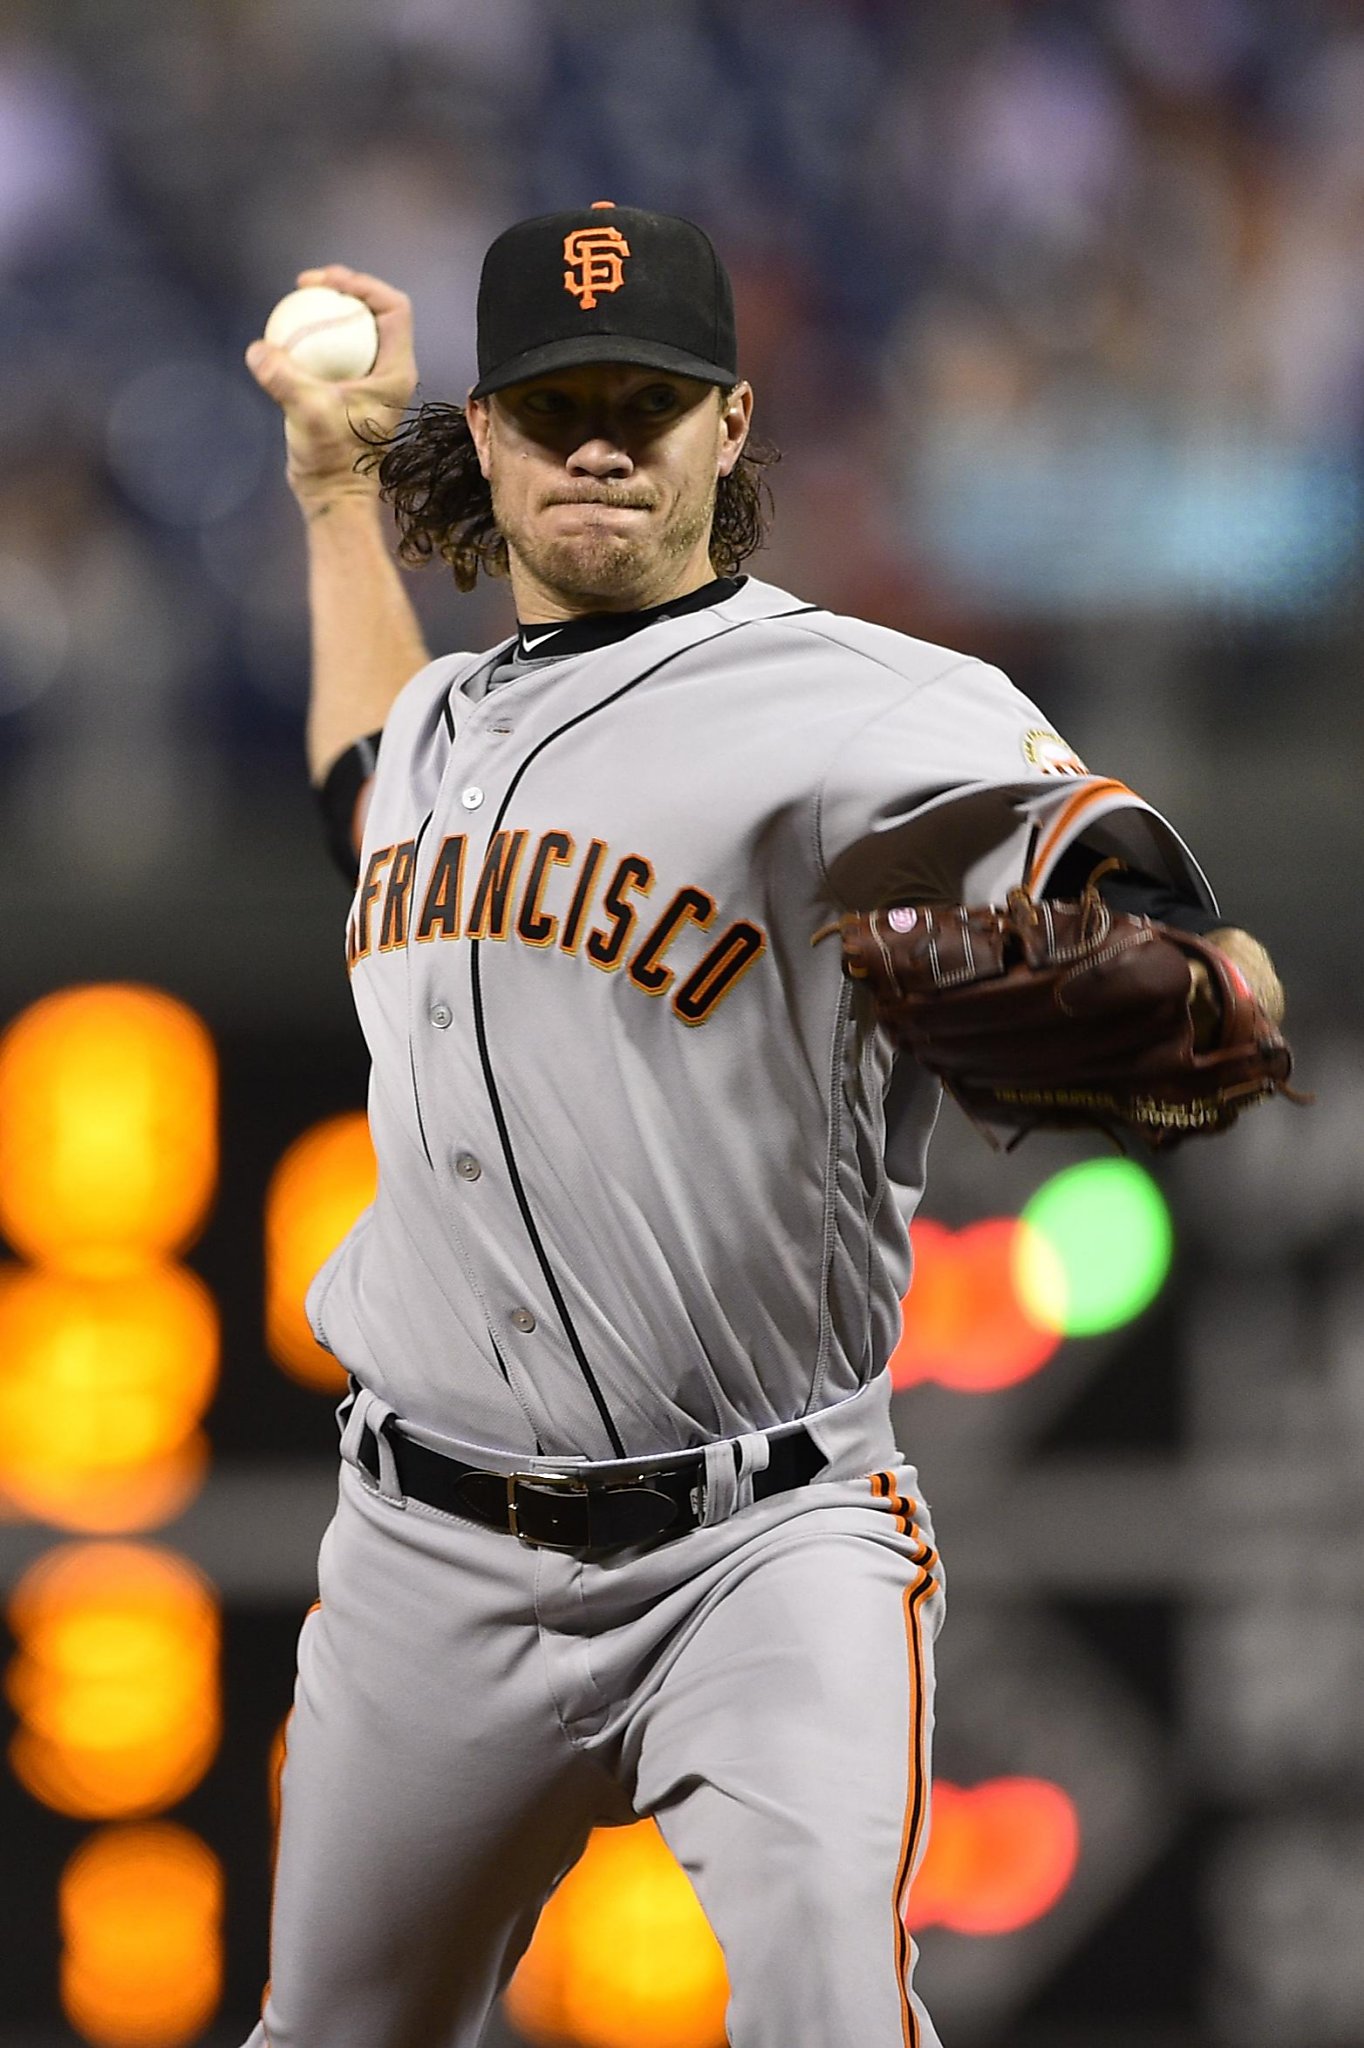 Giants' pitcher Jake Peavy hasn't allowed cruelty by others to